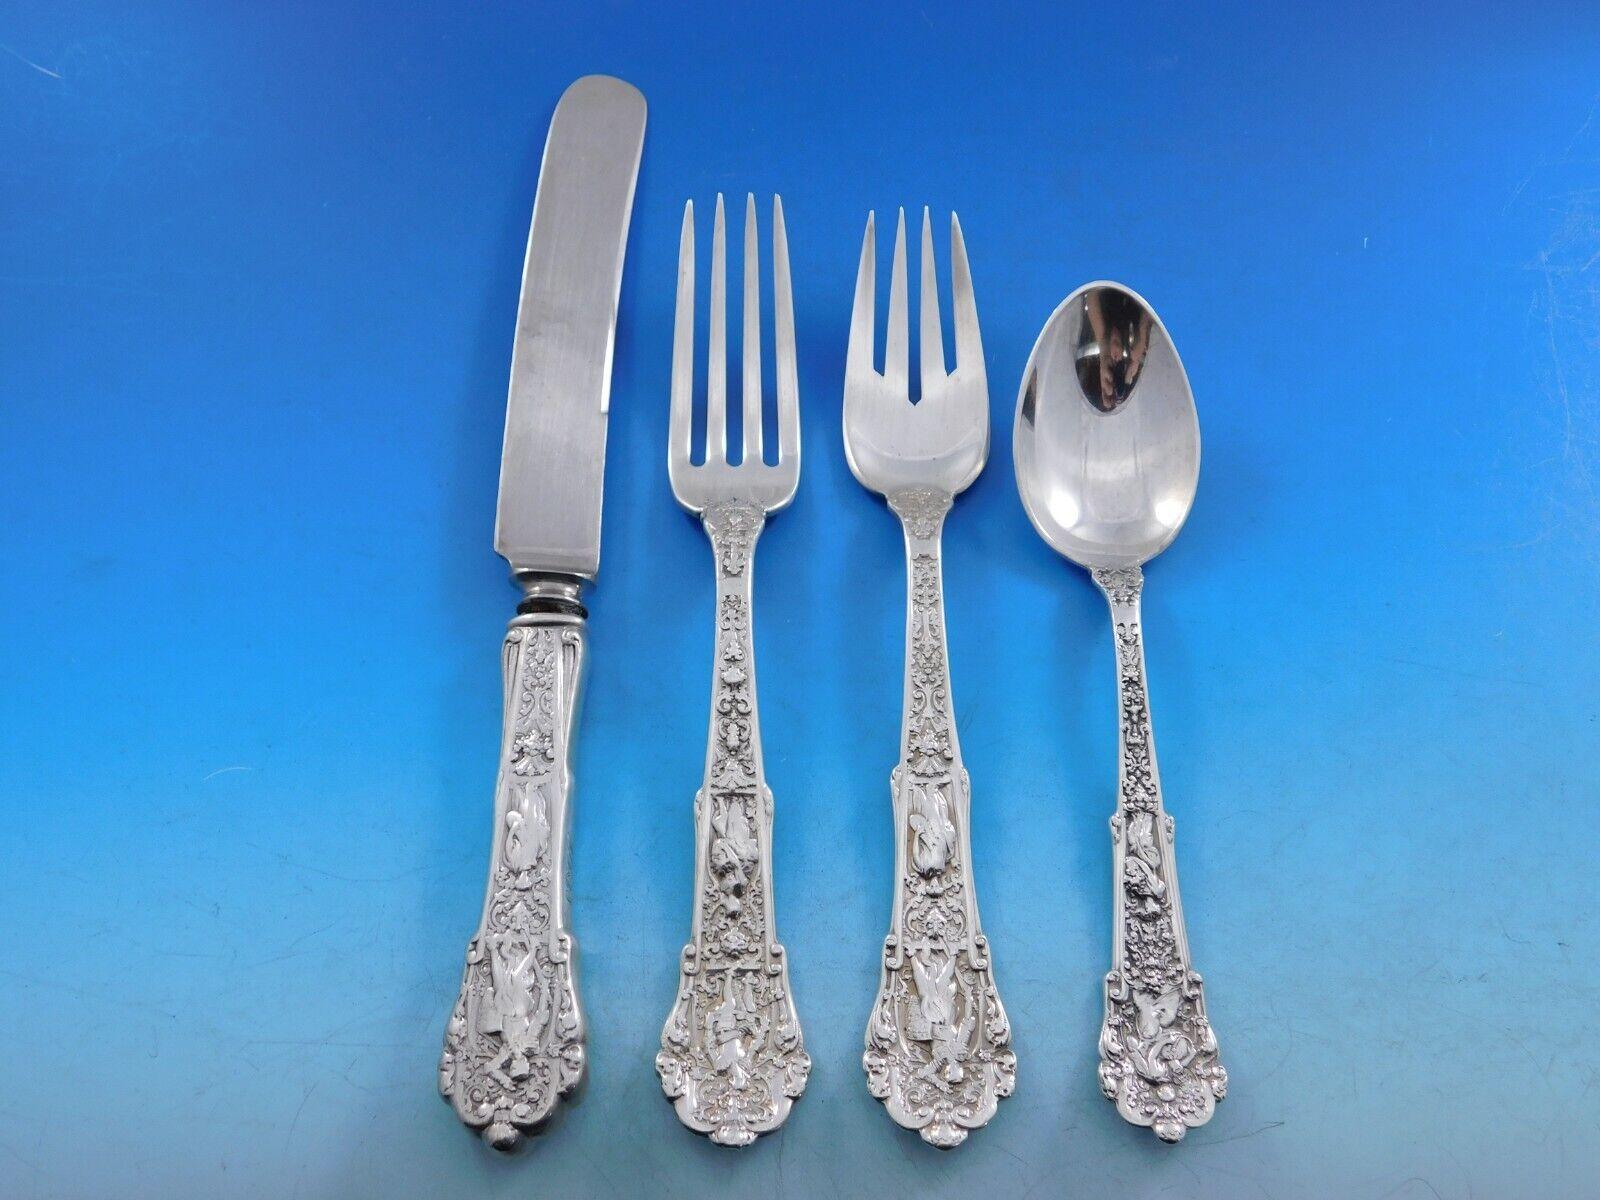 Rare Dinner and Luncheon size Coligni by Gorham sterling silver figural multi-motif Flatware set - 144 pieces. This pattern was designed by renowned artist Antoine Heller, and introduced by Gorham in the year 1889. This set includes:

12 Dinner